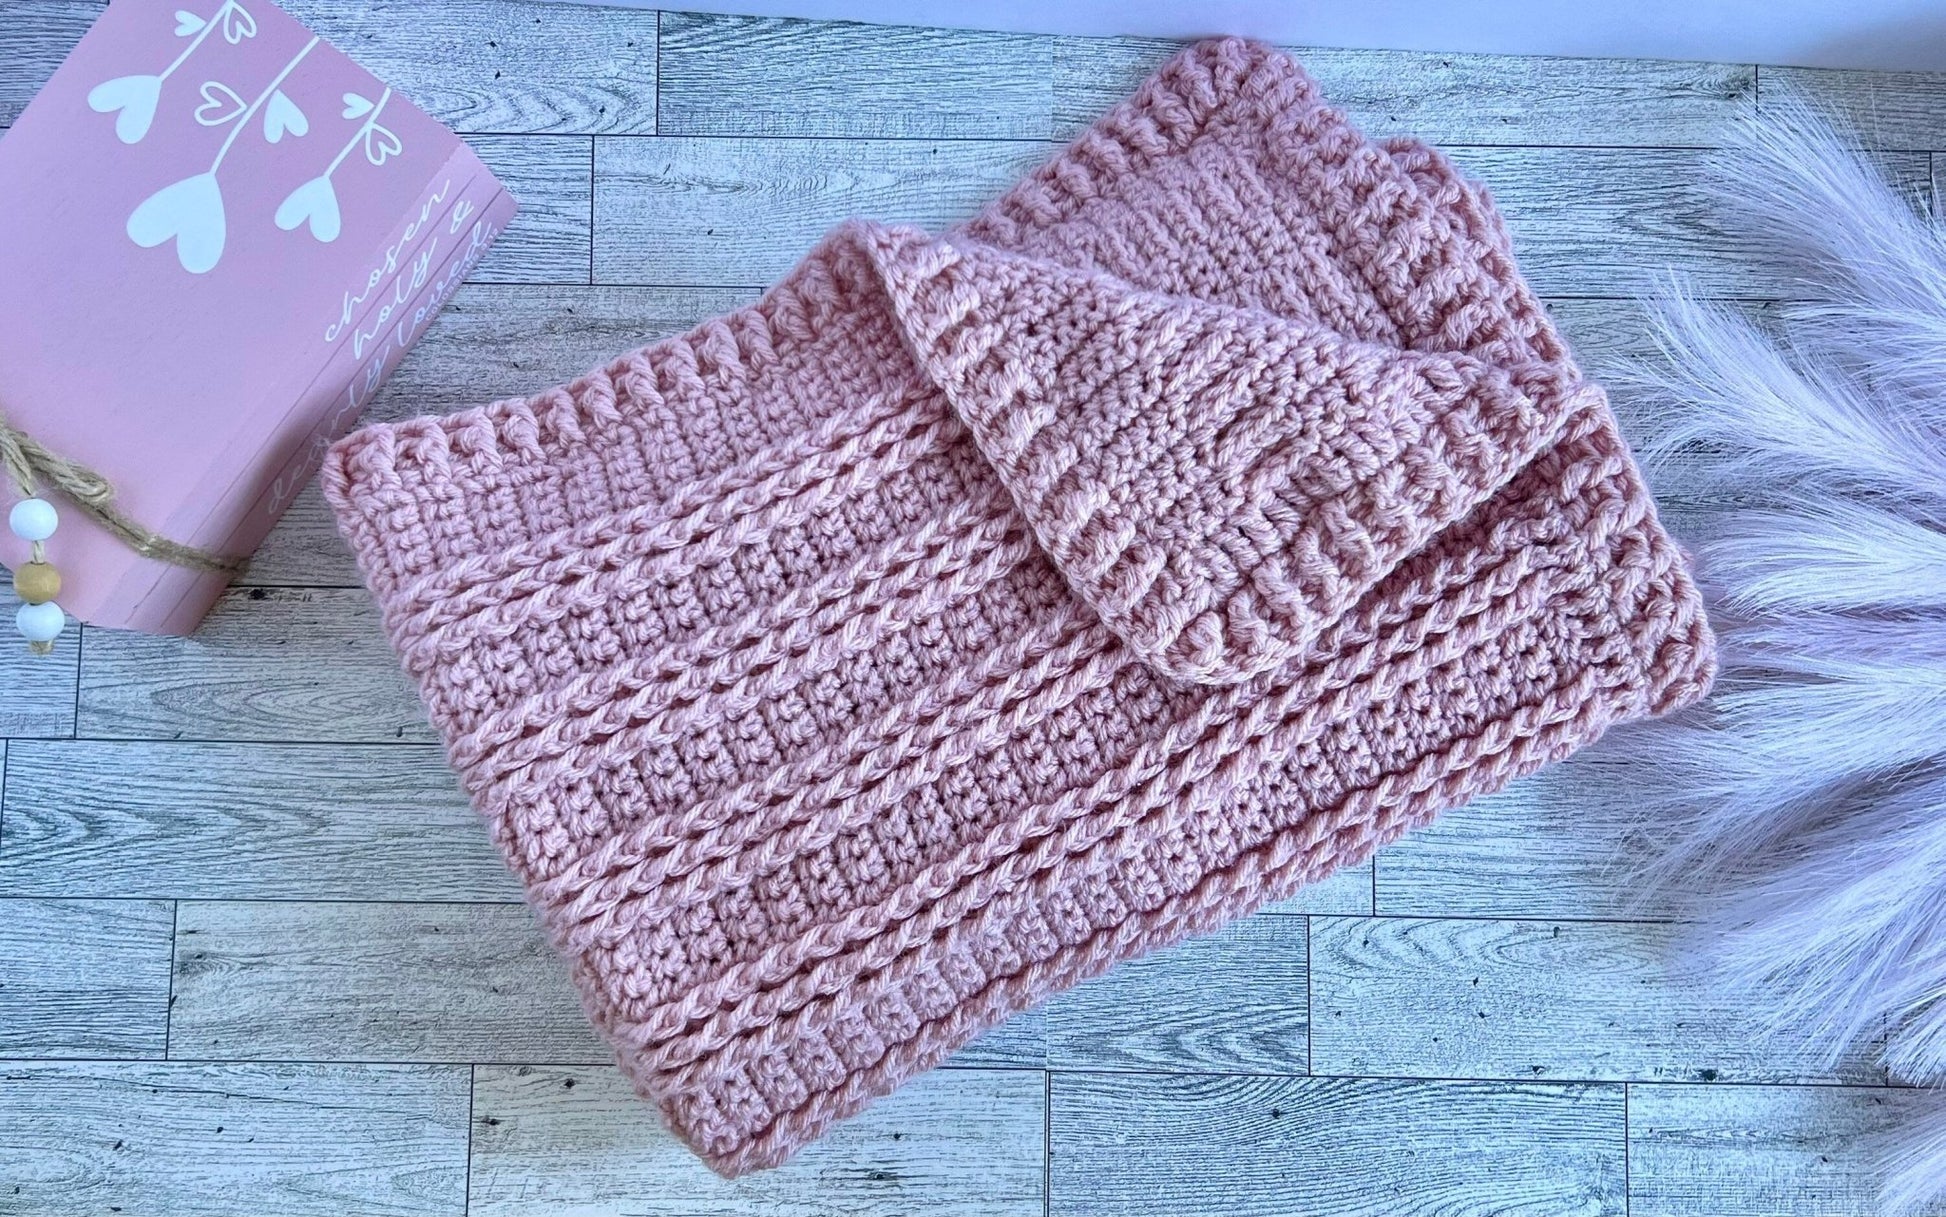 Cradle size baby blanket 31”x26”, dusty pink - blanket for baby girl - baby shower gift for baby girl, boho room decor, modern heirloom - Lilly Grace Sparkle Boutique